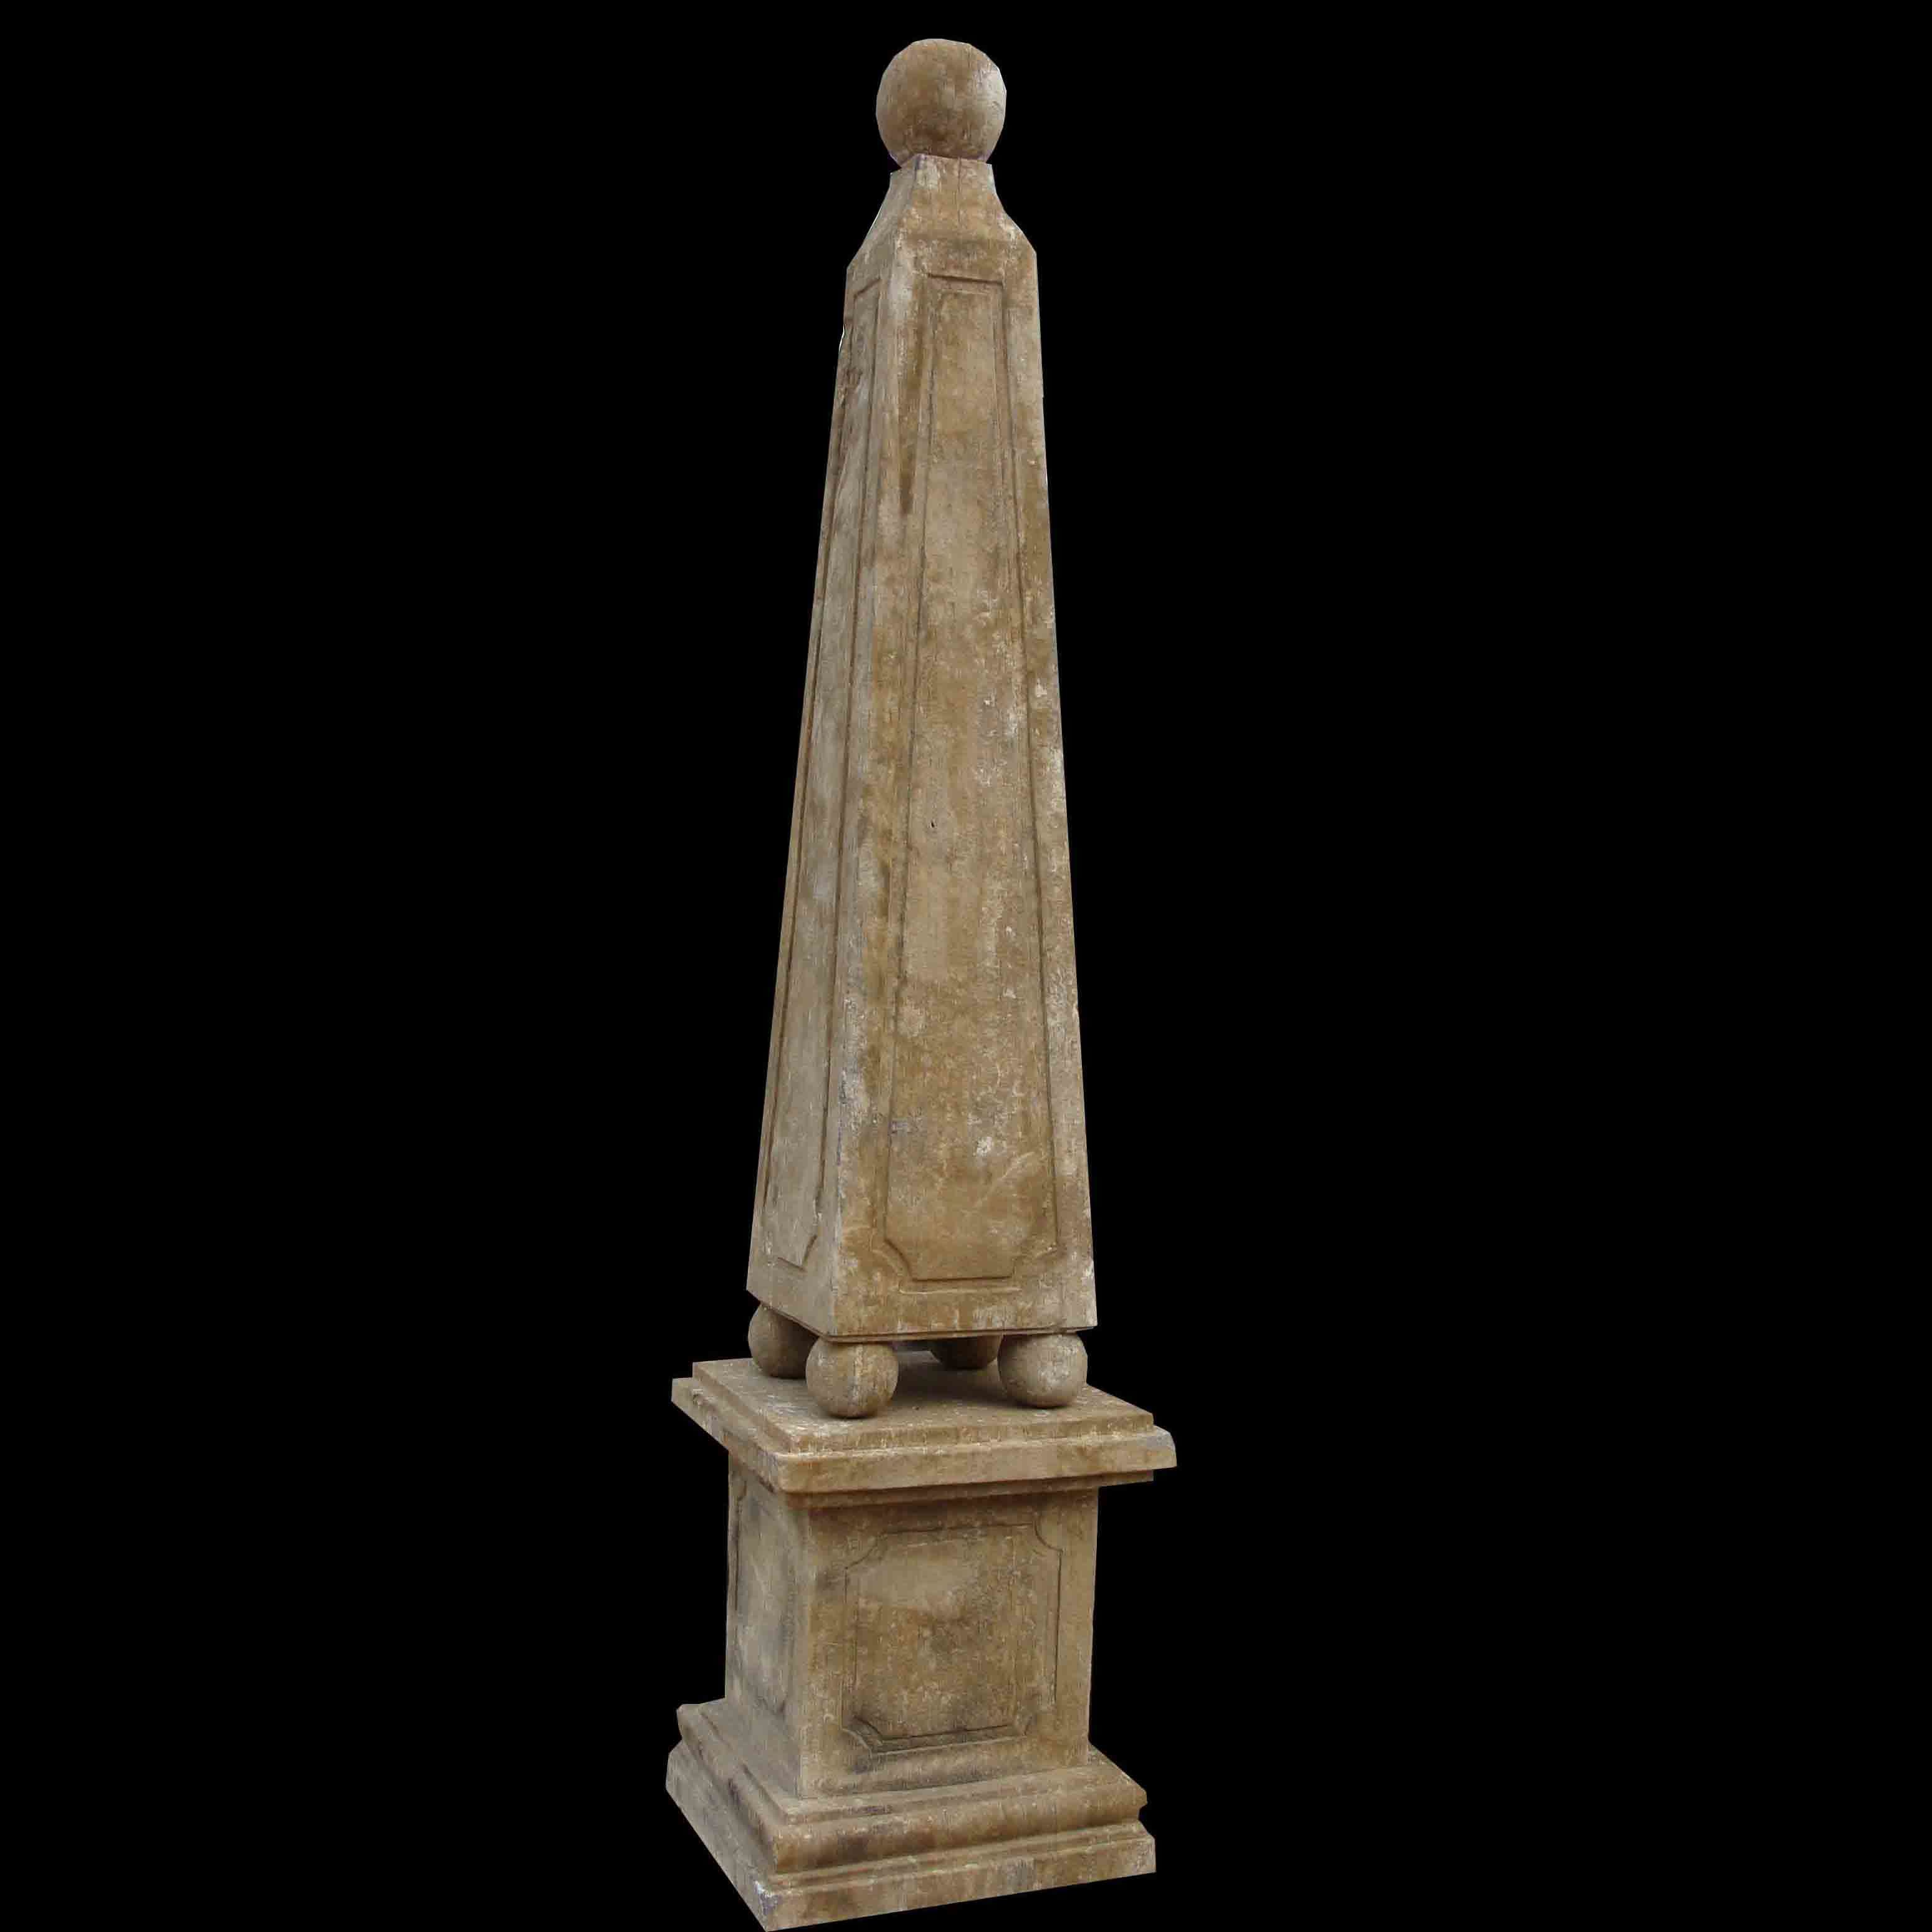 Antique Finish Stone Carving Decoration, Marble Carvings